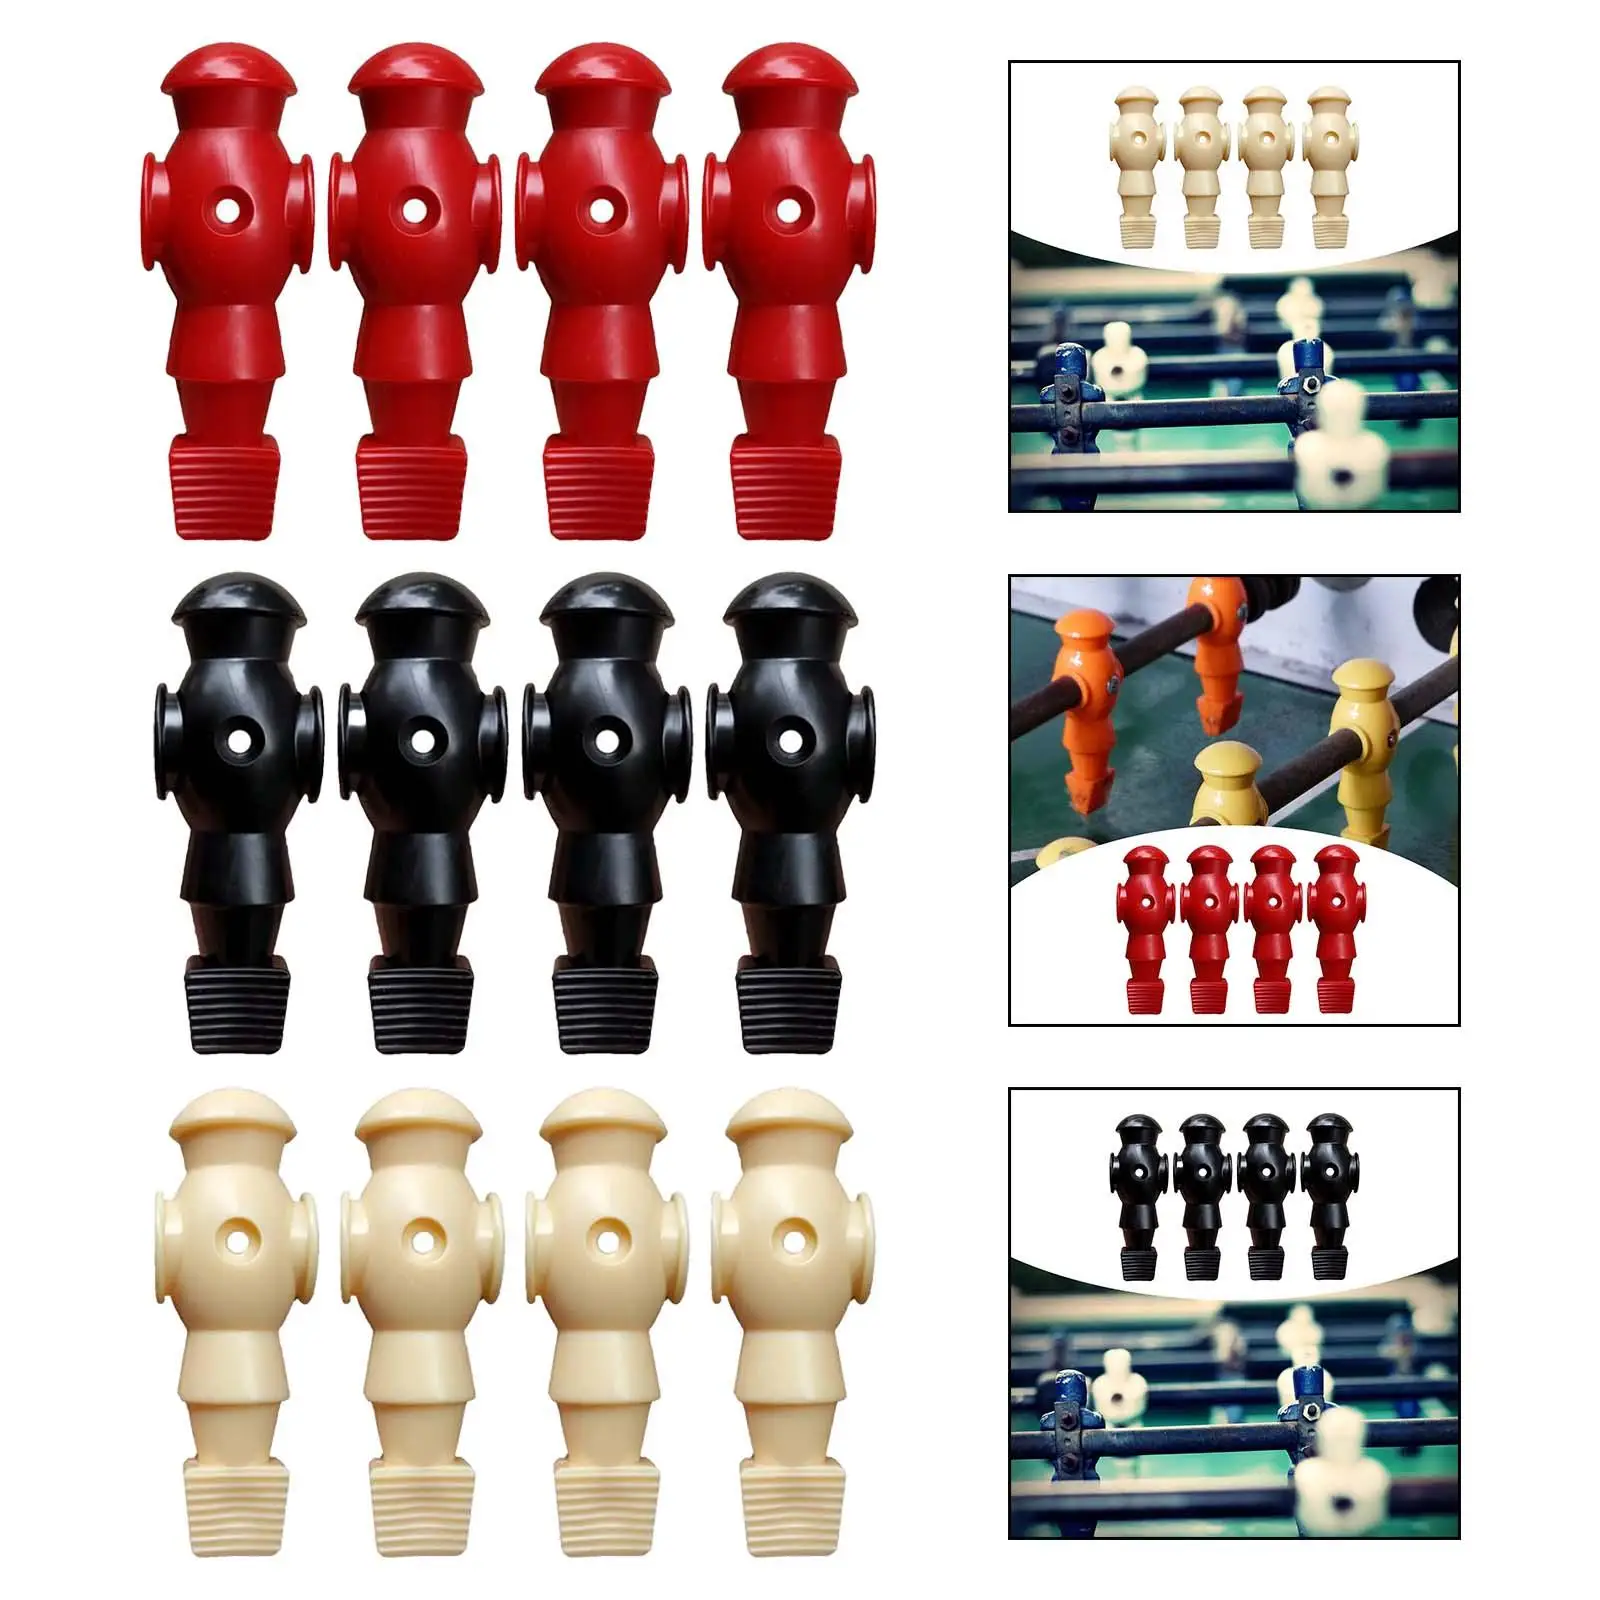 4Pcs Foosball Players Figure Replacement Set Fits 5/8 inch Rods Foosball Men